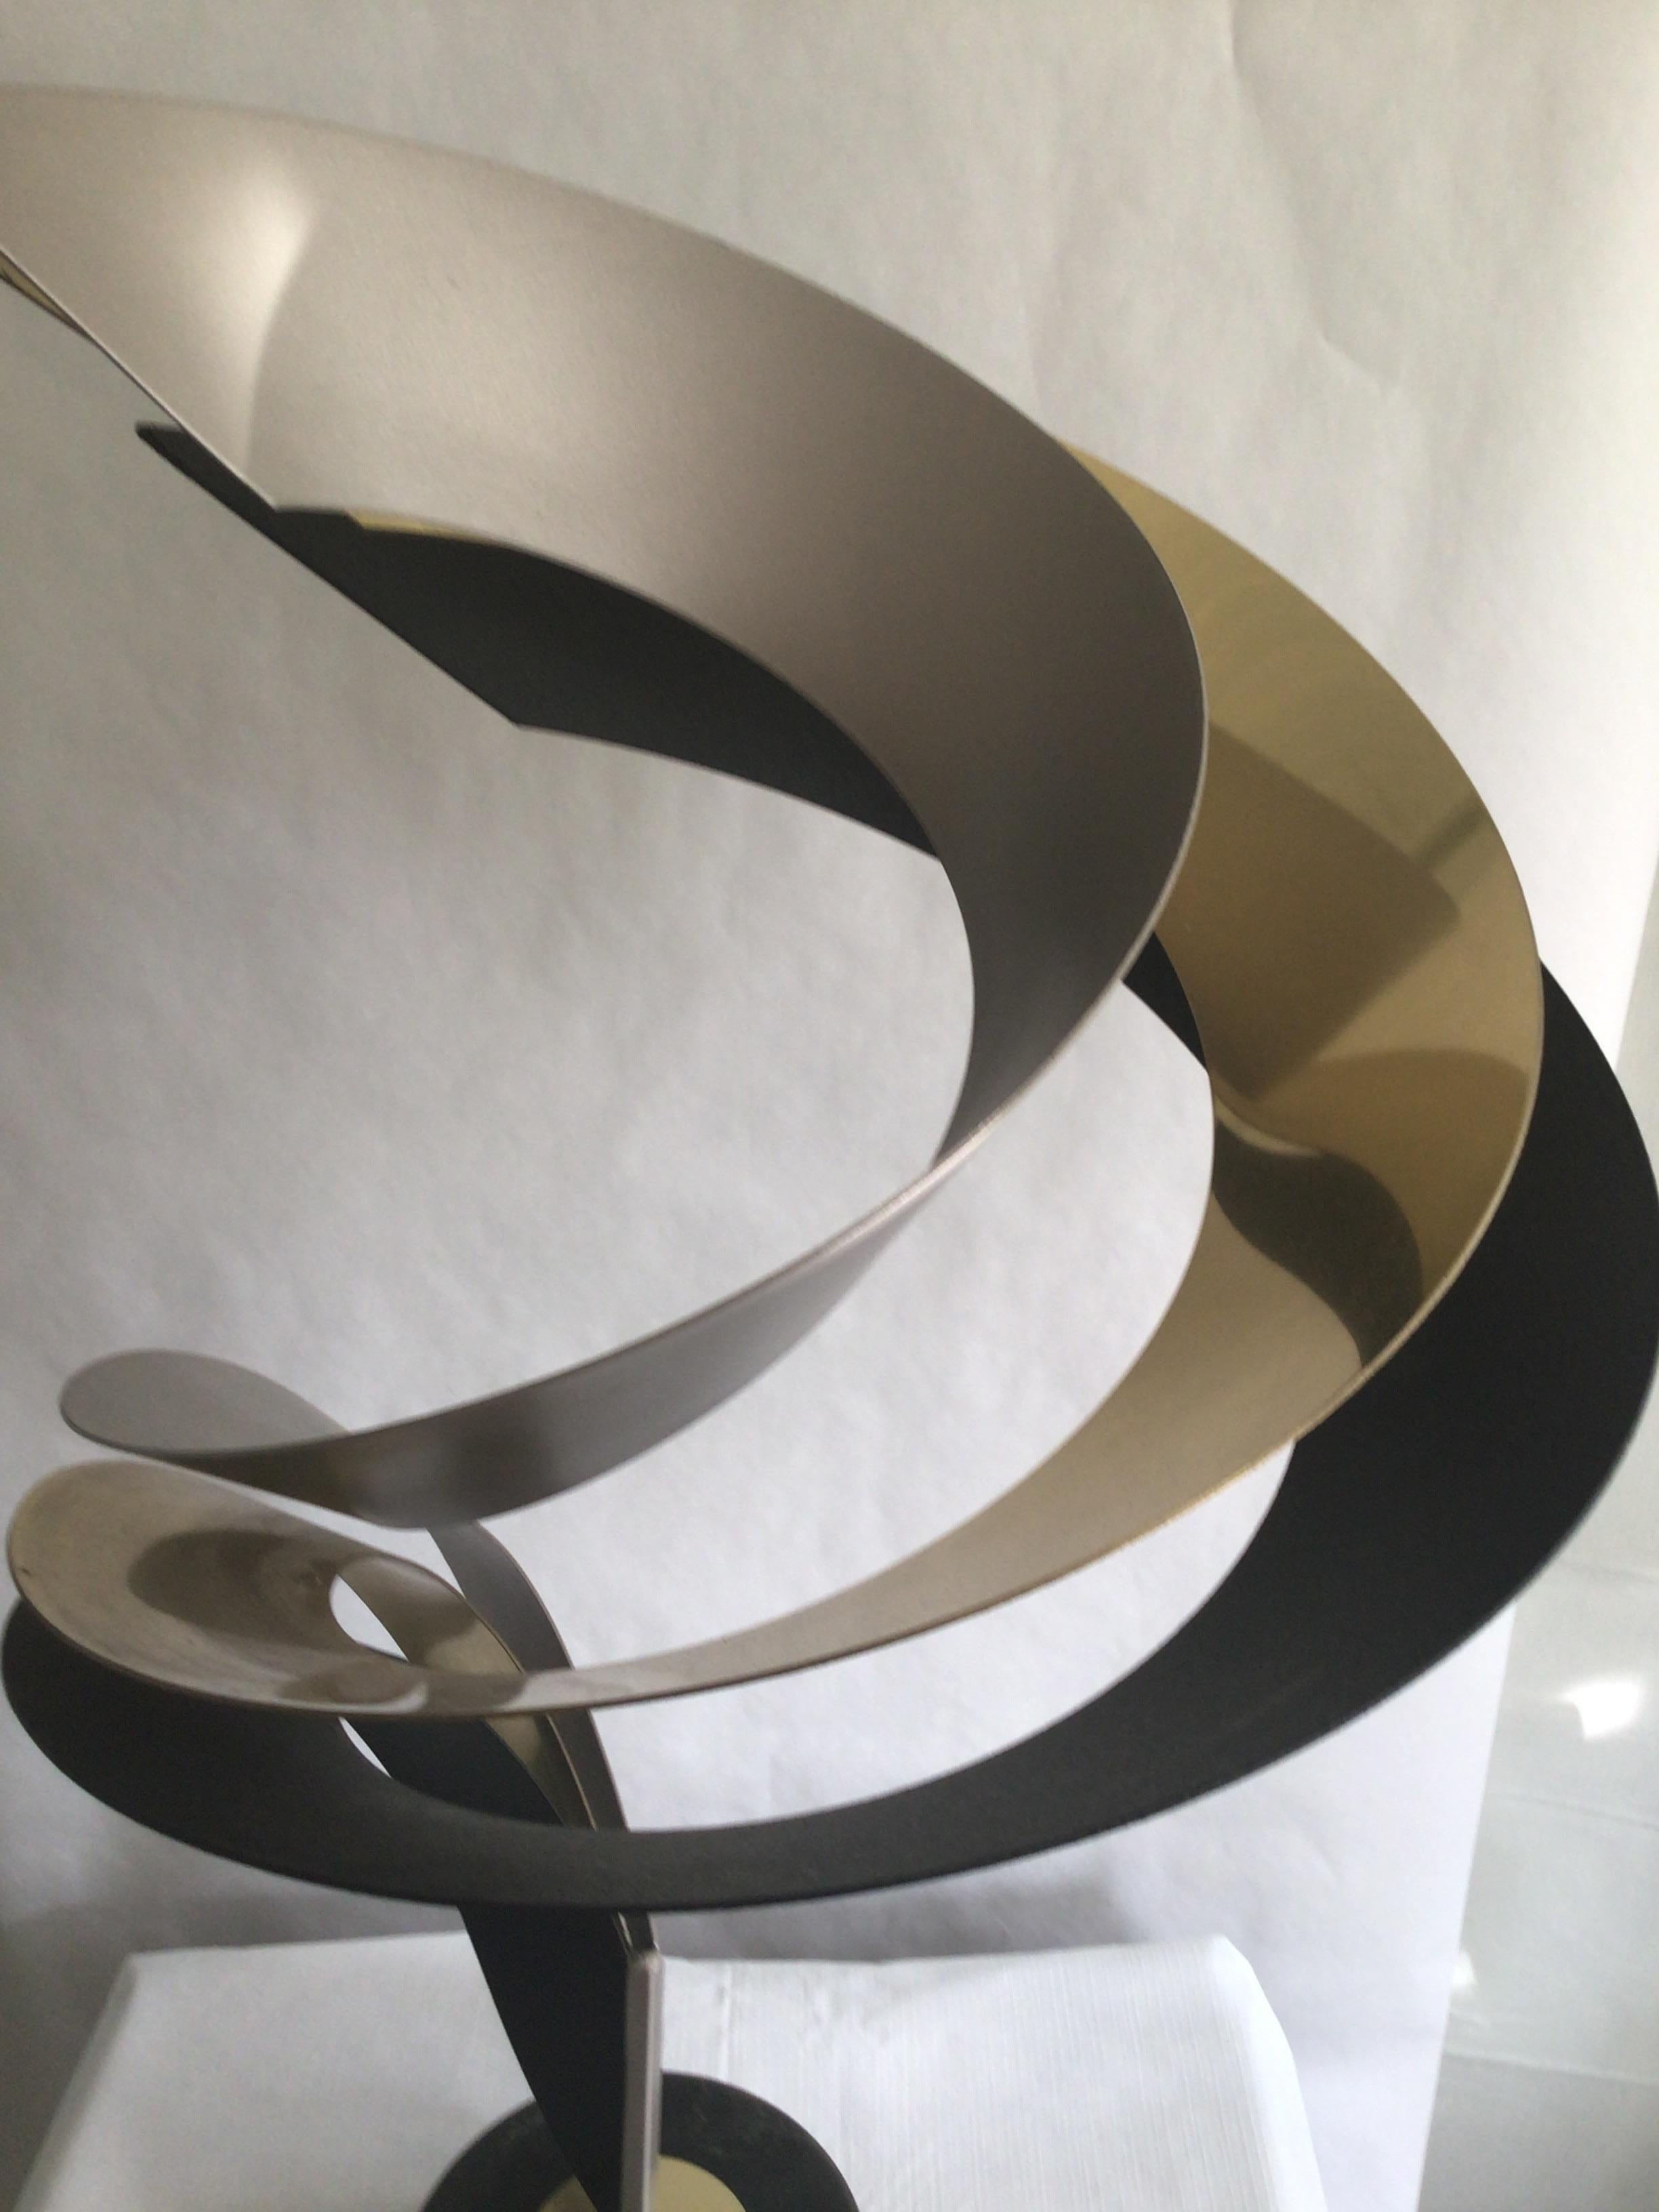 Late 20th Century 1980s Brass Steel and Aluminum Swirled Sculpture on Swivel Base For Sale